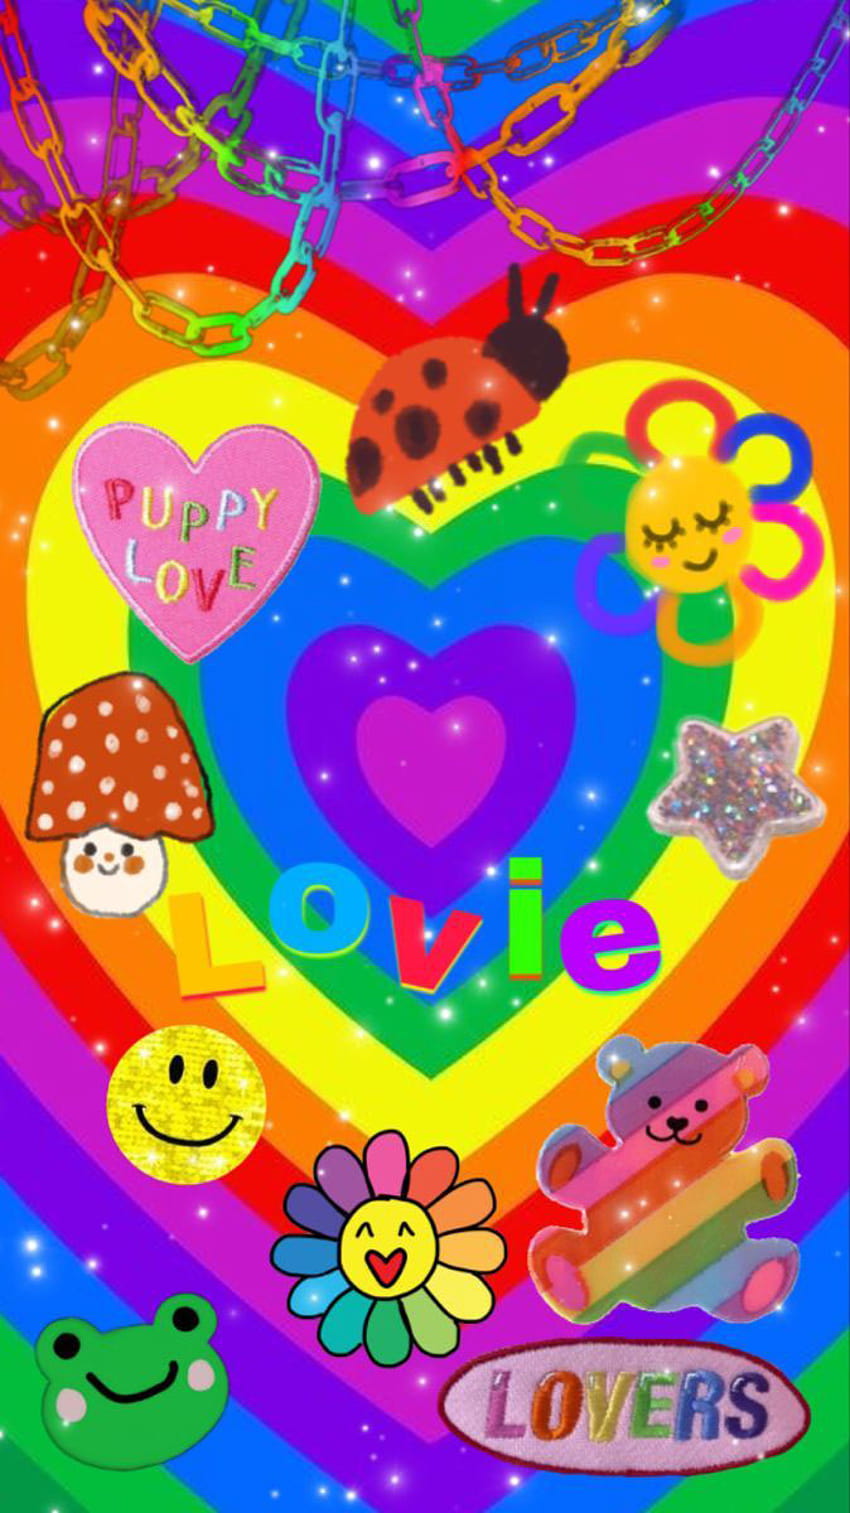 A colorful poster with lots of stickers - Kidcore, indie, colorful